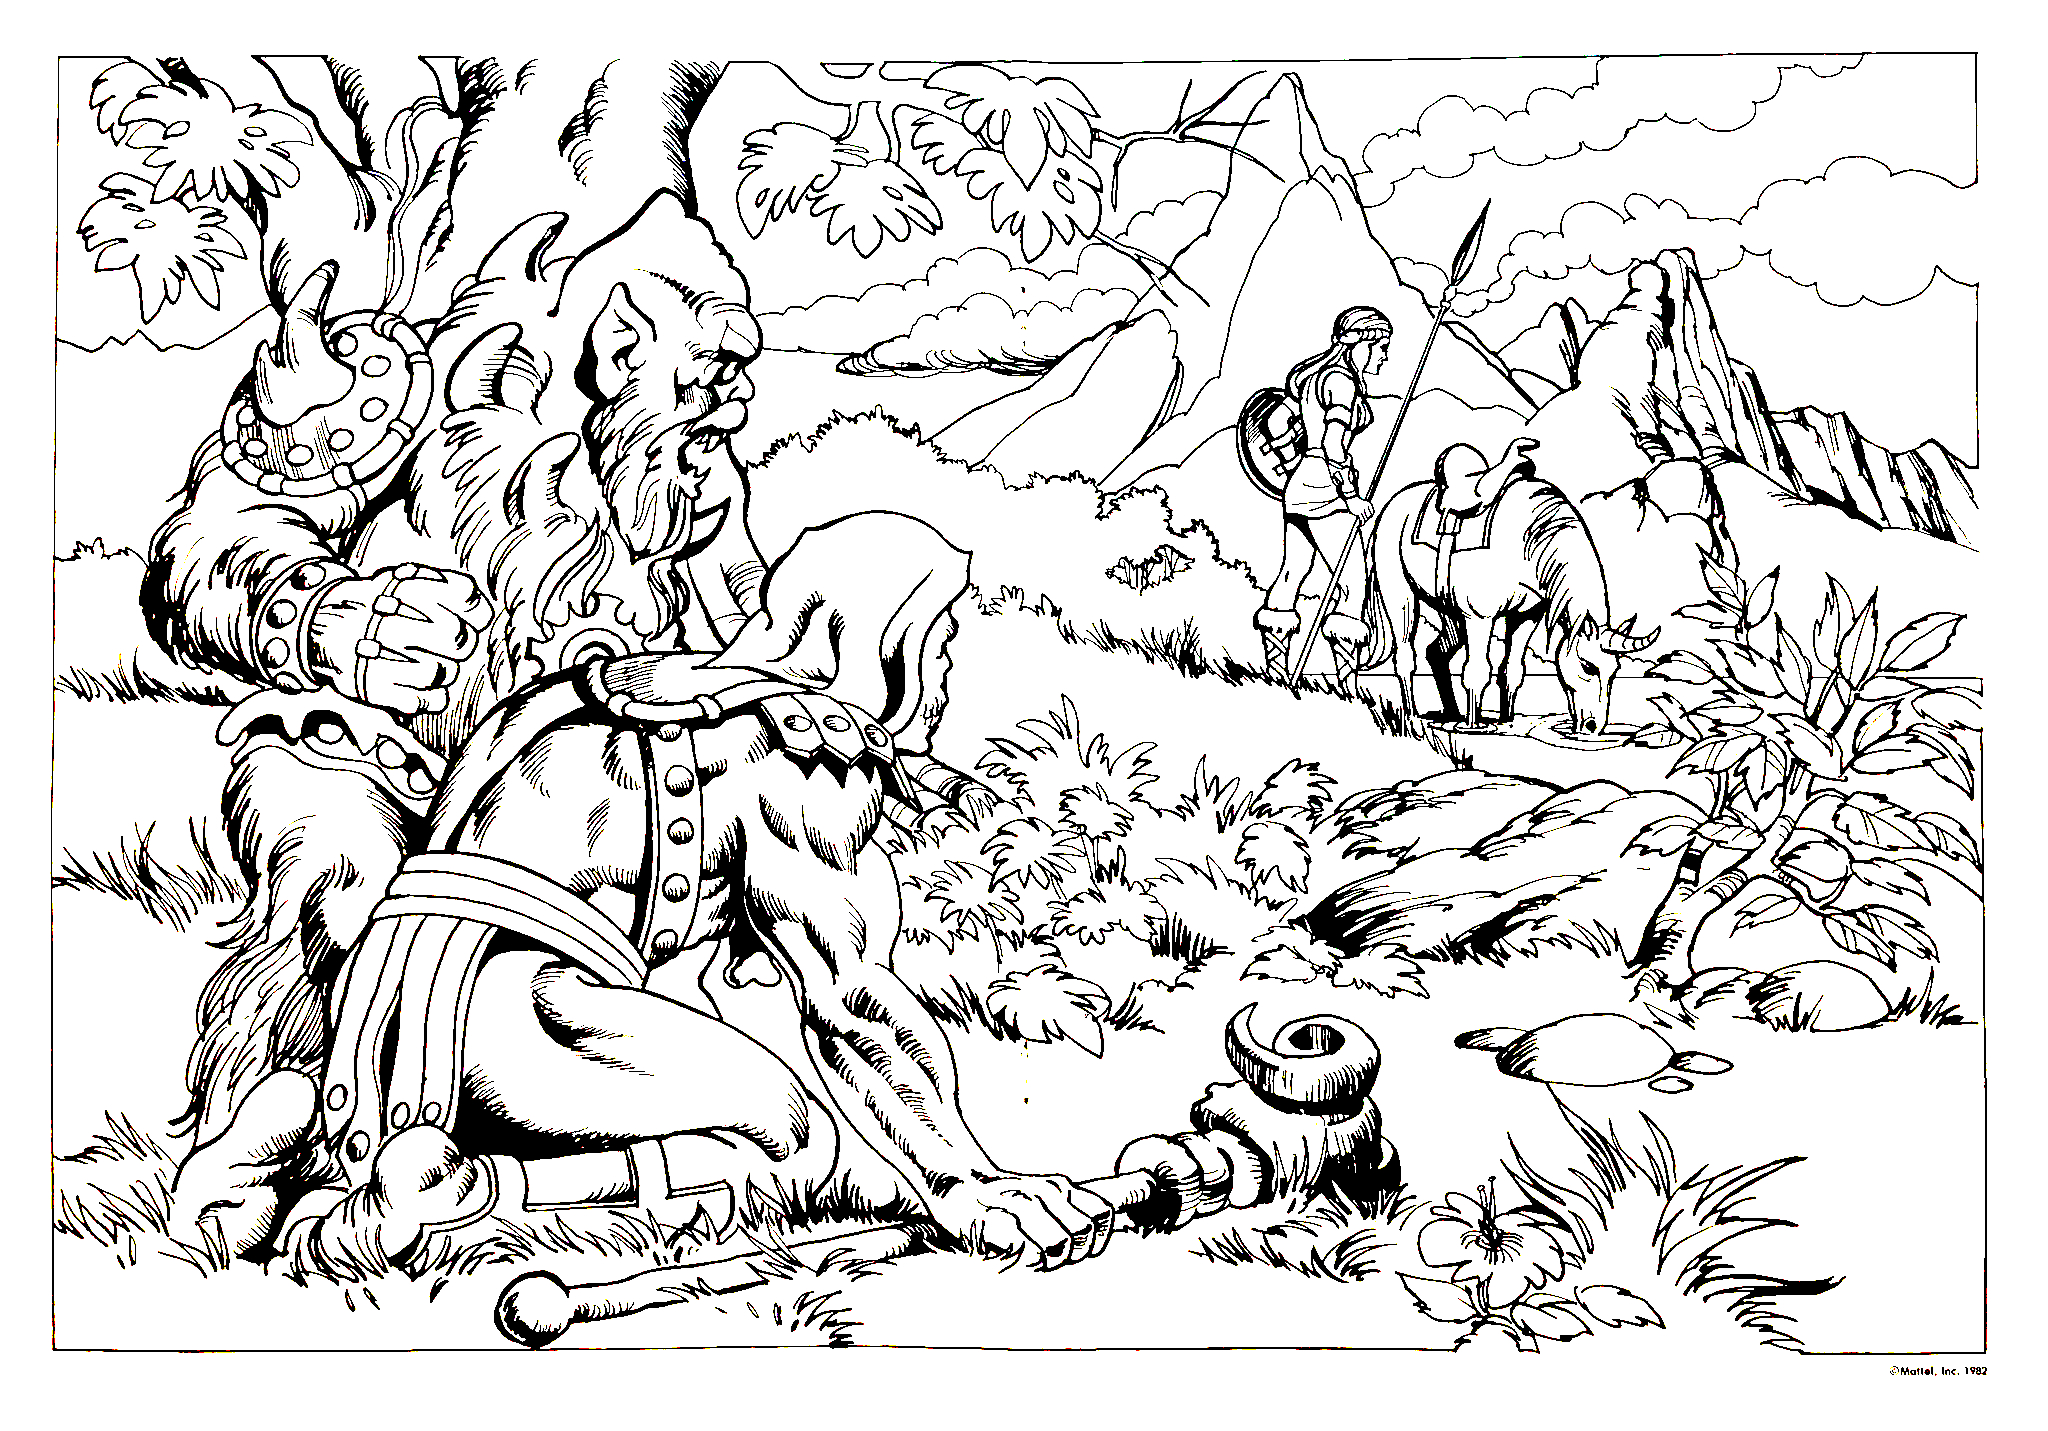 Masters of the universe poster coloring book battle ram